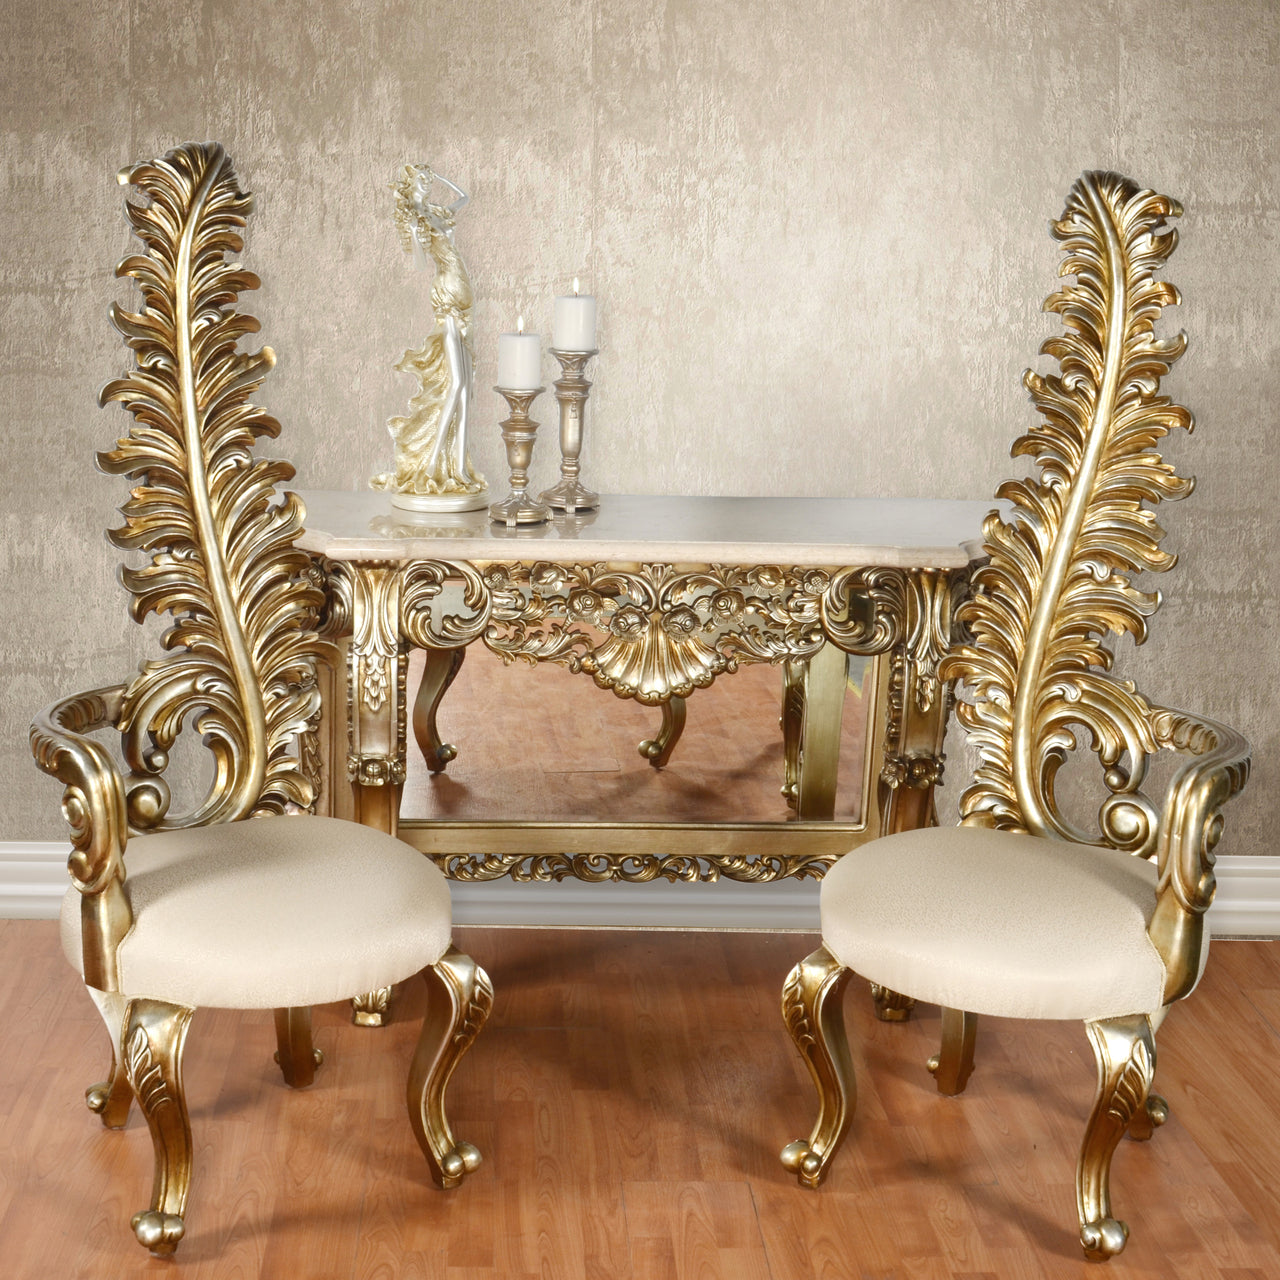 Italia Leaf Rococo Chair Gold Set of 2 Chairs - Furniture on Main